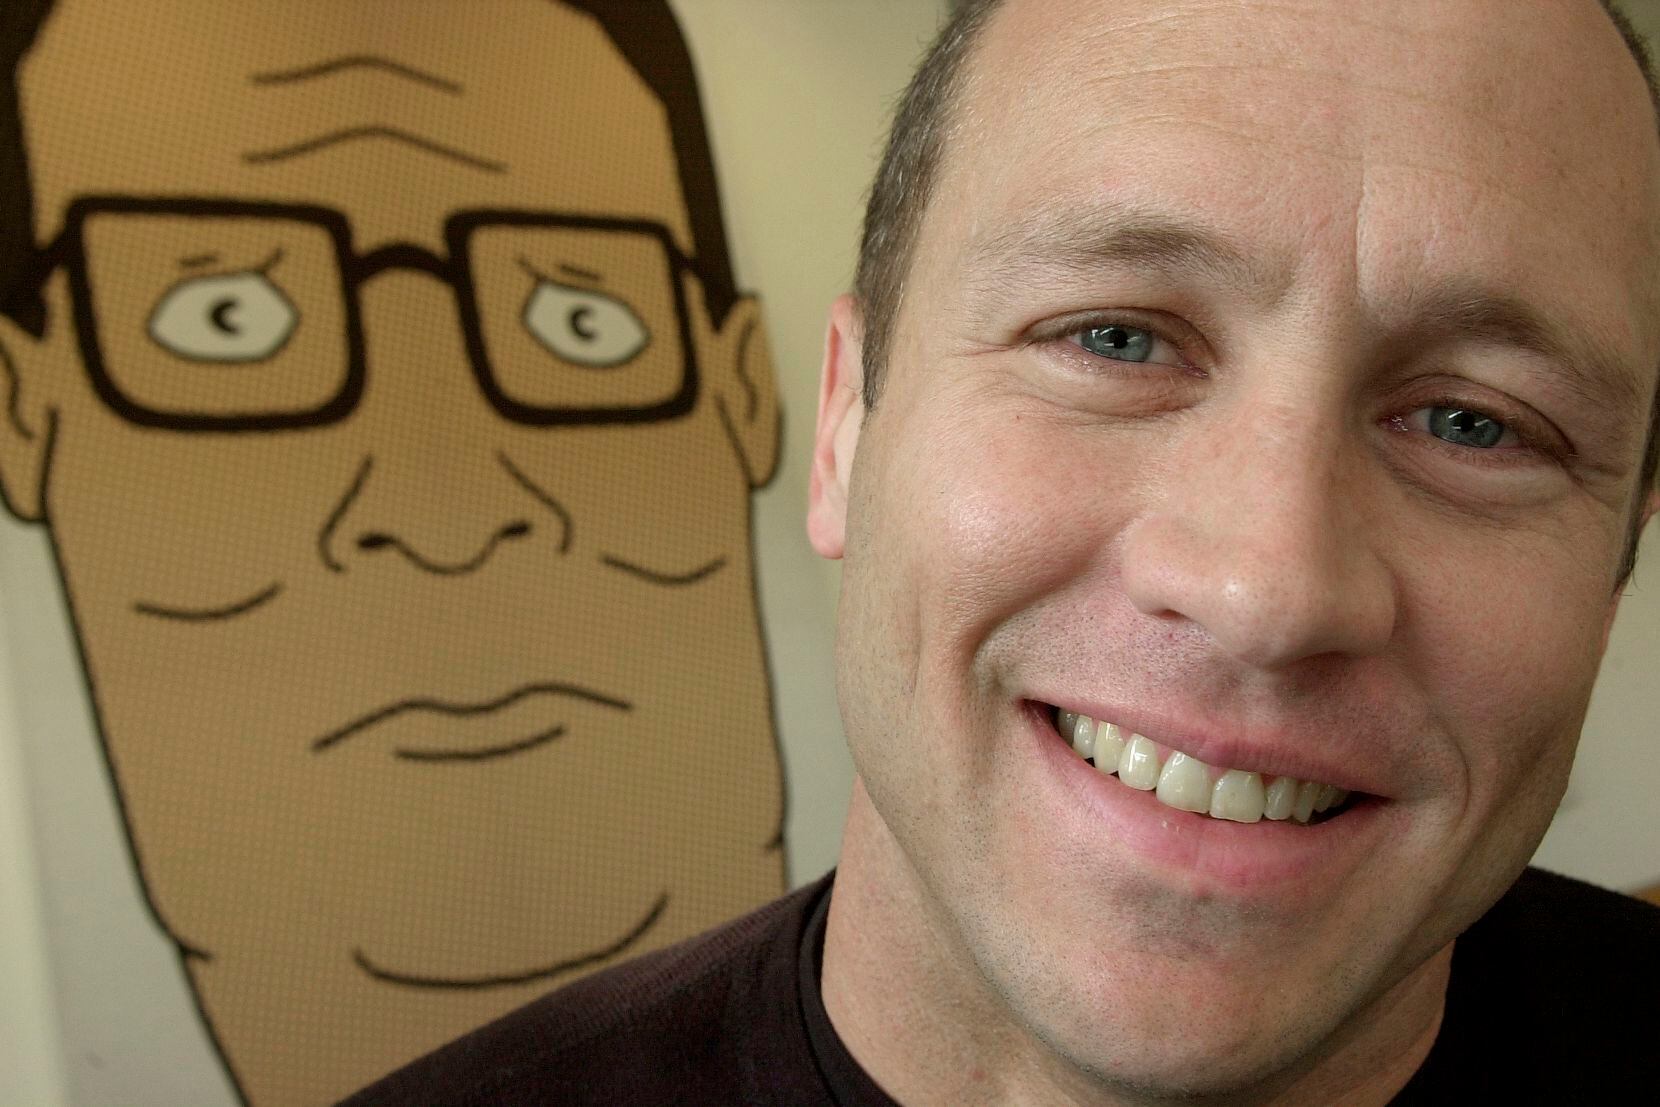 King of the Hill' revival a go at Hulu with original cast members returning  – New York Daily News